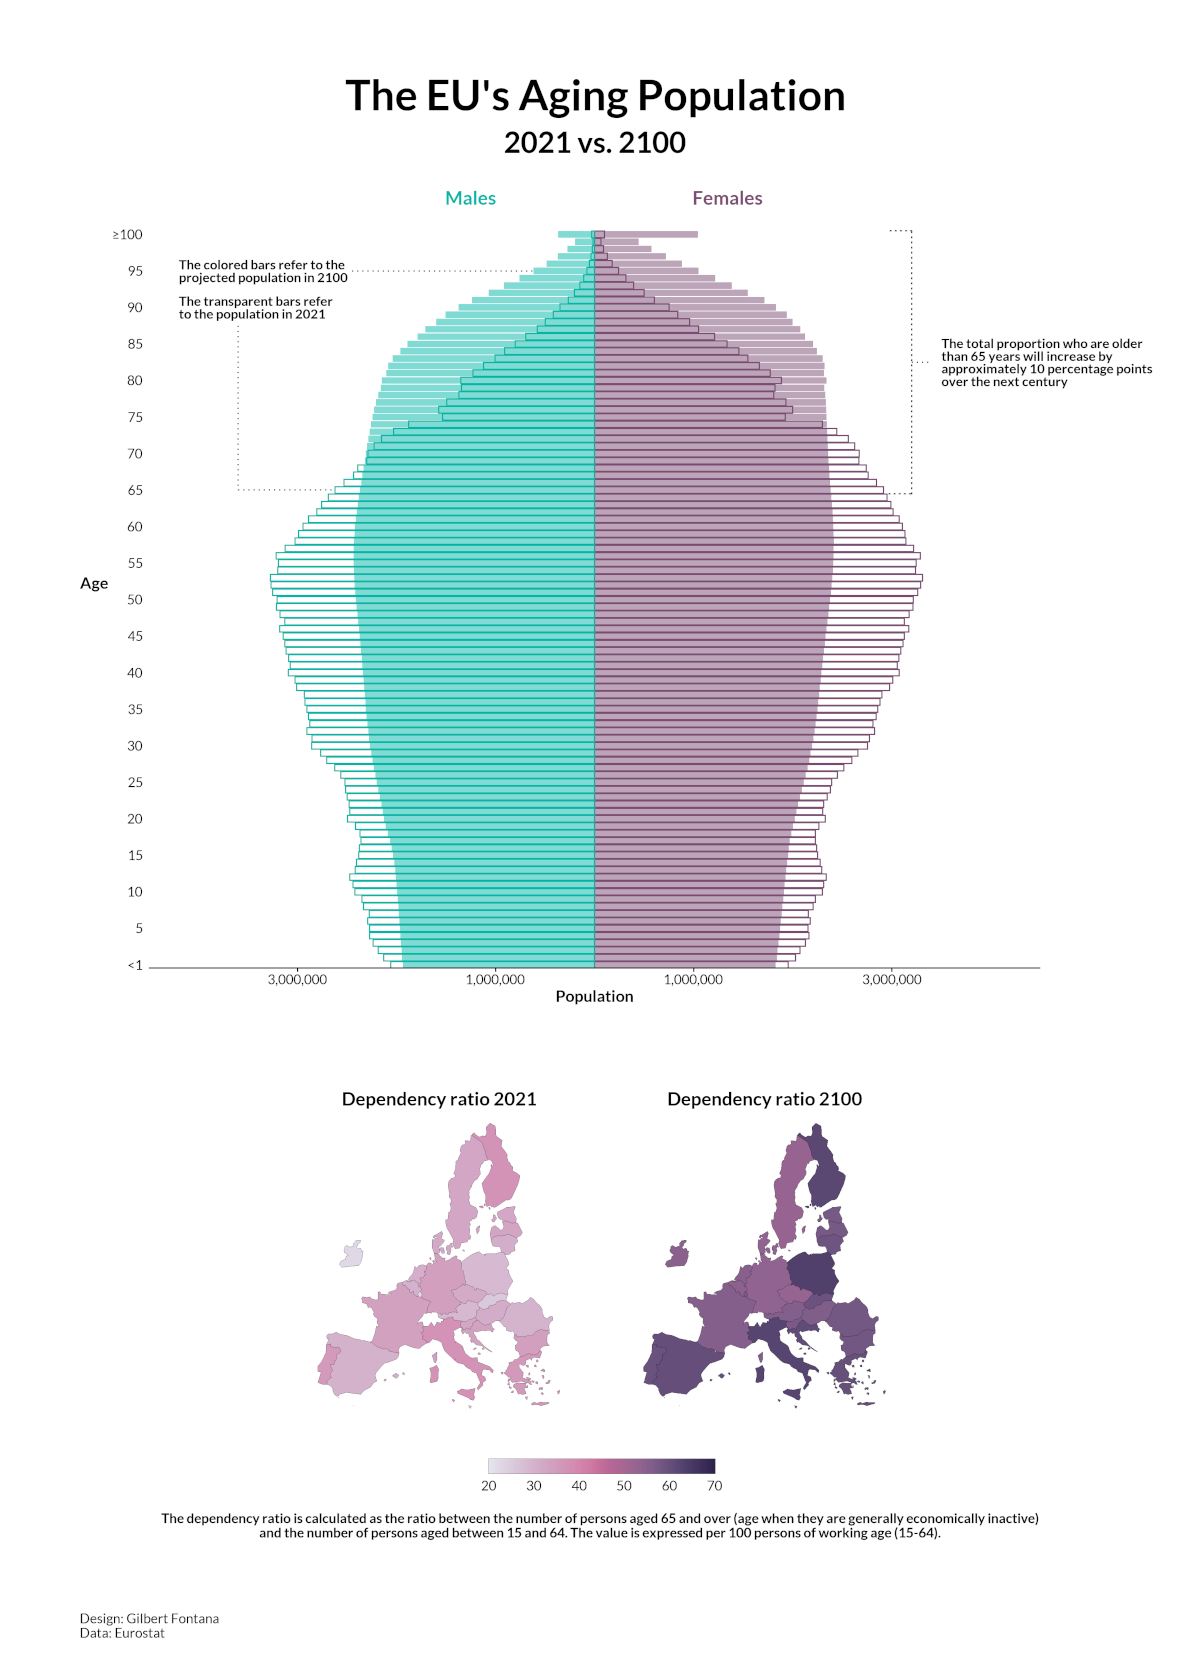 Visualizing The European Union's Aging Population by 2100